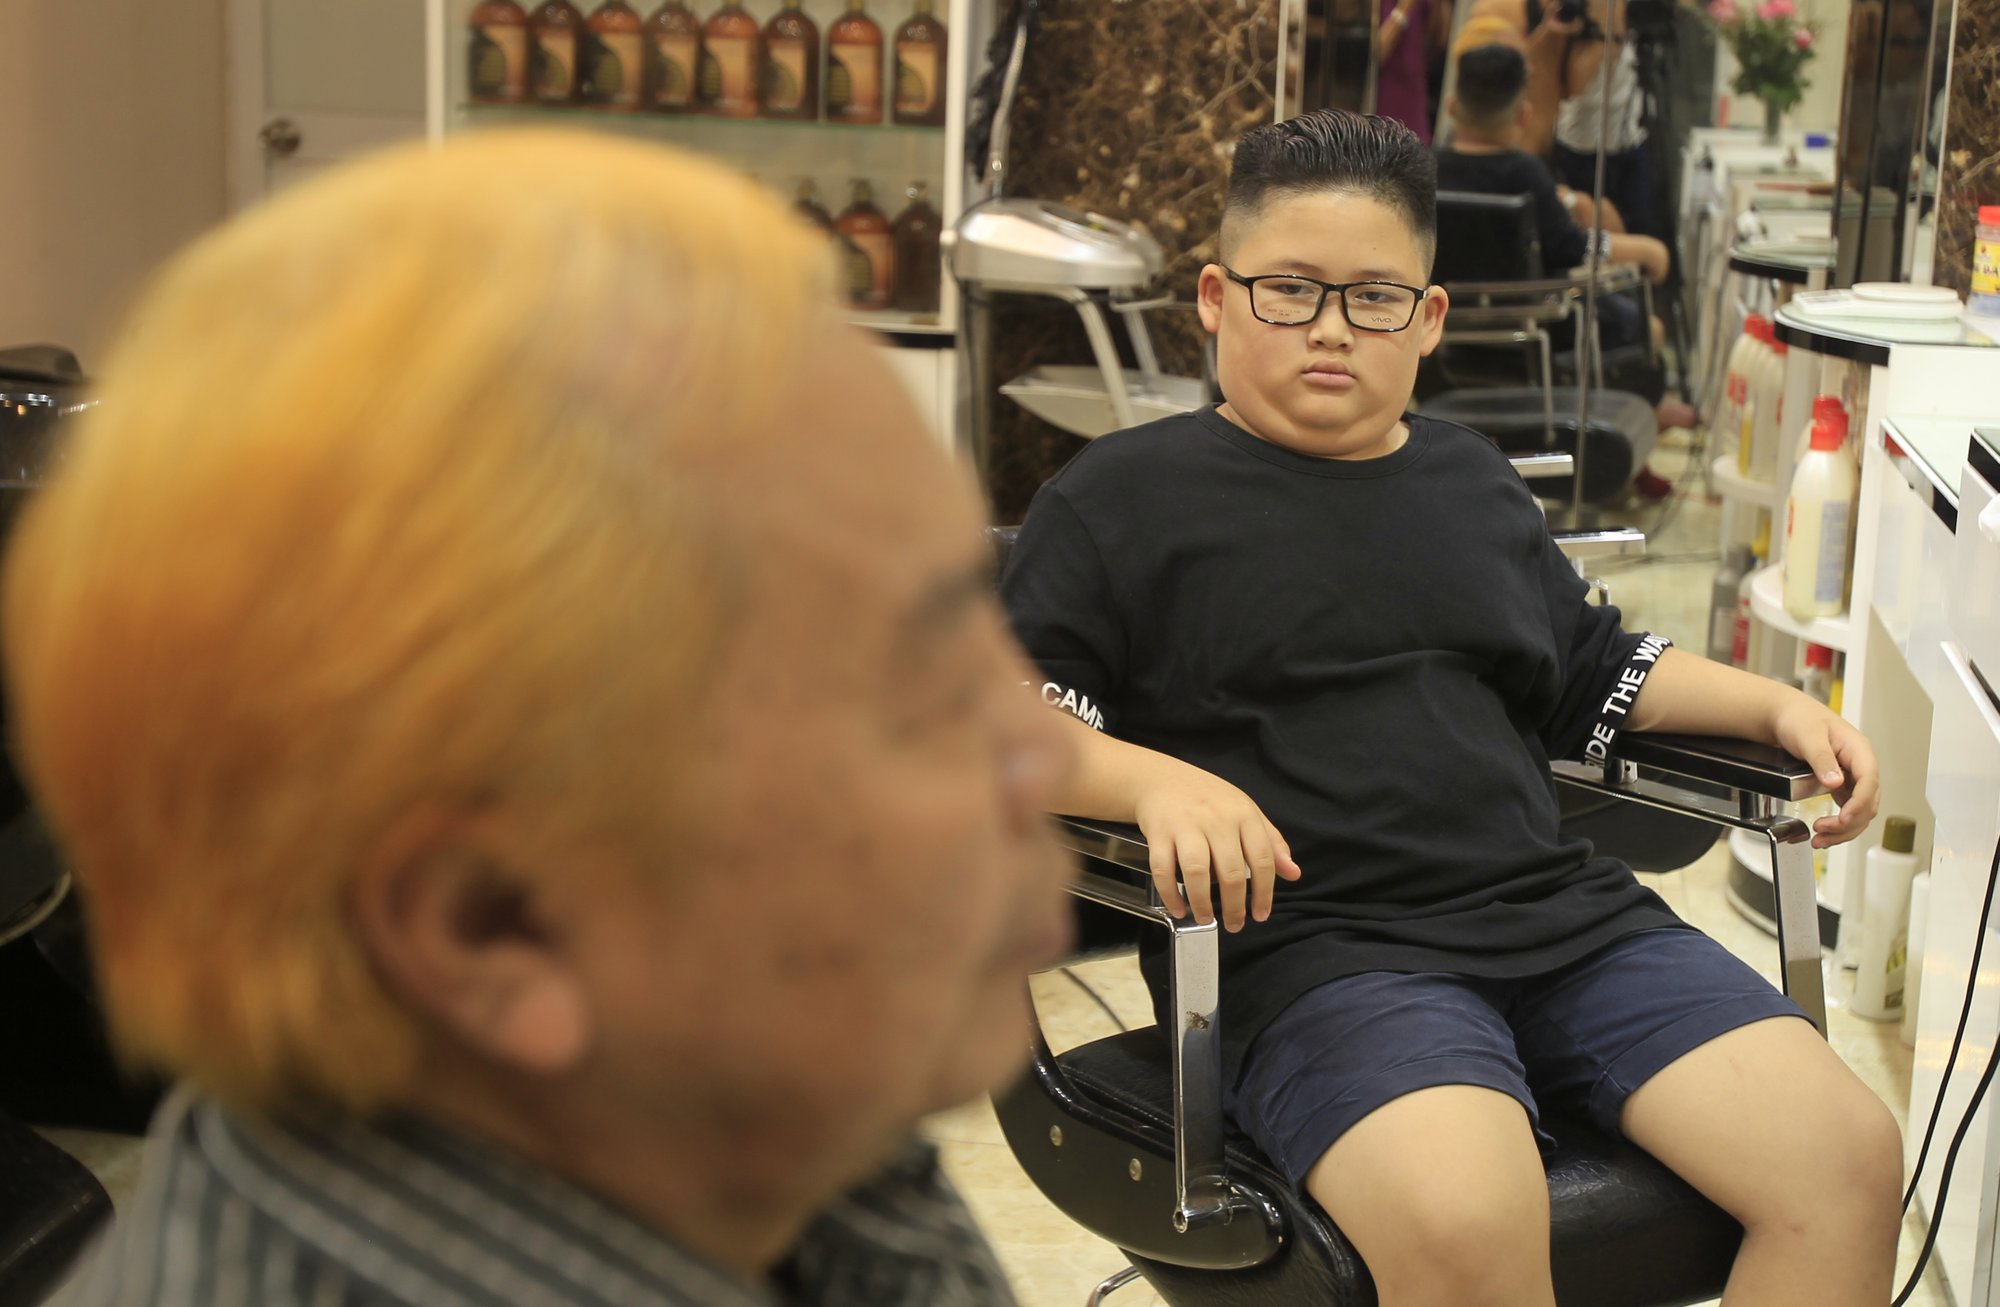 Le Phuc Hai, 66, left, and To Gia Huy, 9, sit after having Trump and Kim haircuts in Hanoi, Vietnam, on Tuesday, Feb.19, 2019. U.S. President Donald Trump and North Korean leader Kim Jong Un have become the latest style icons in Hanoi, a week before their second summit is to be held in the capital city of Vietnam.(AP Photo/Hau Dinh)